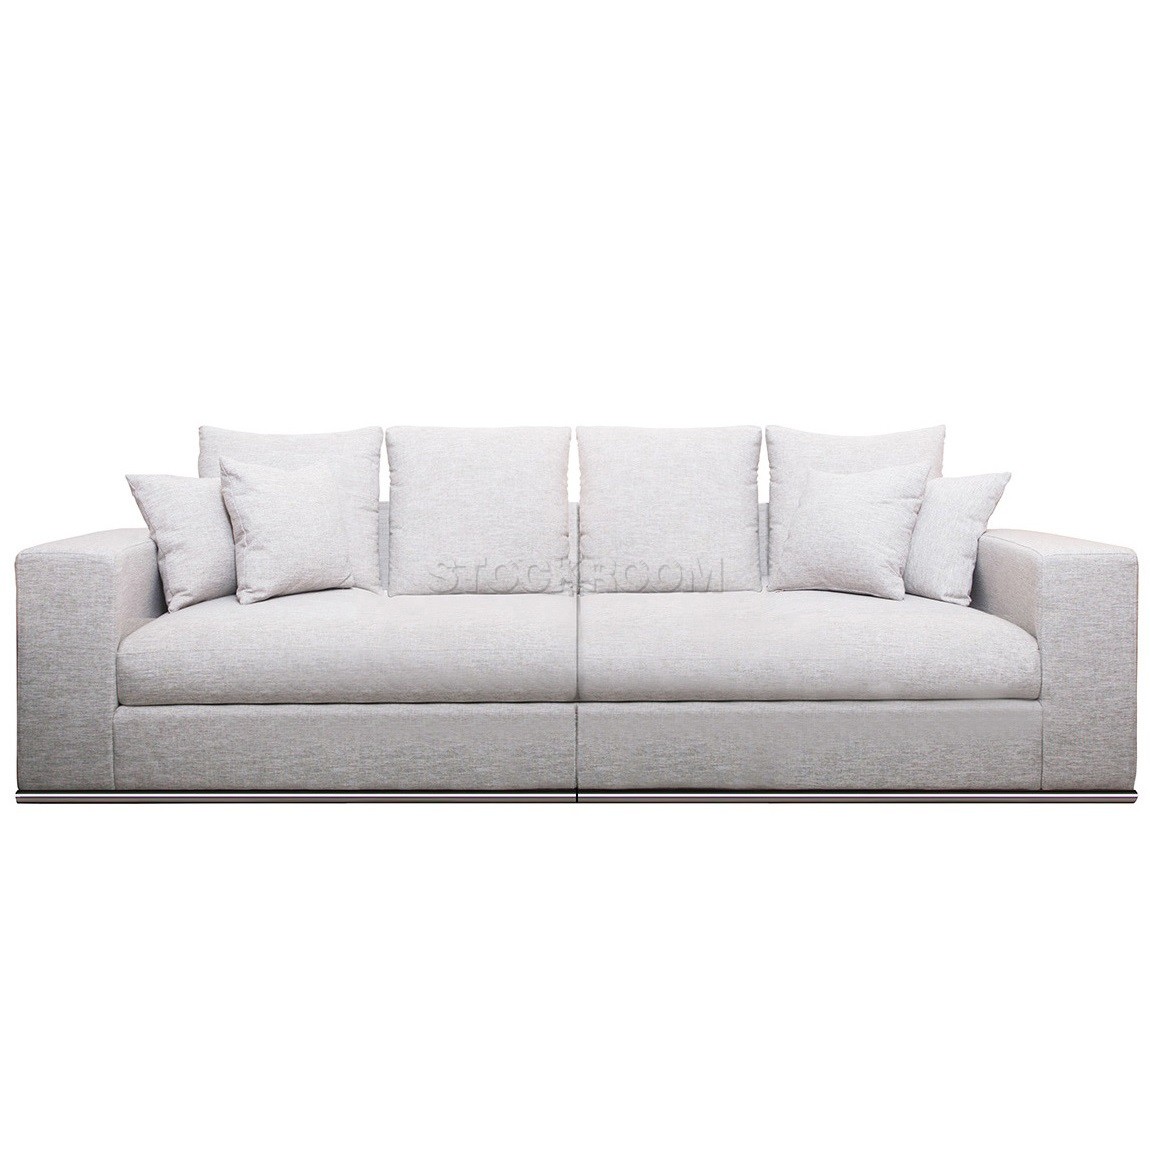 Vella Leather Feather Down Sofa - 3 seater